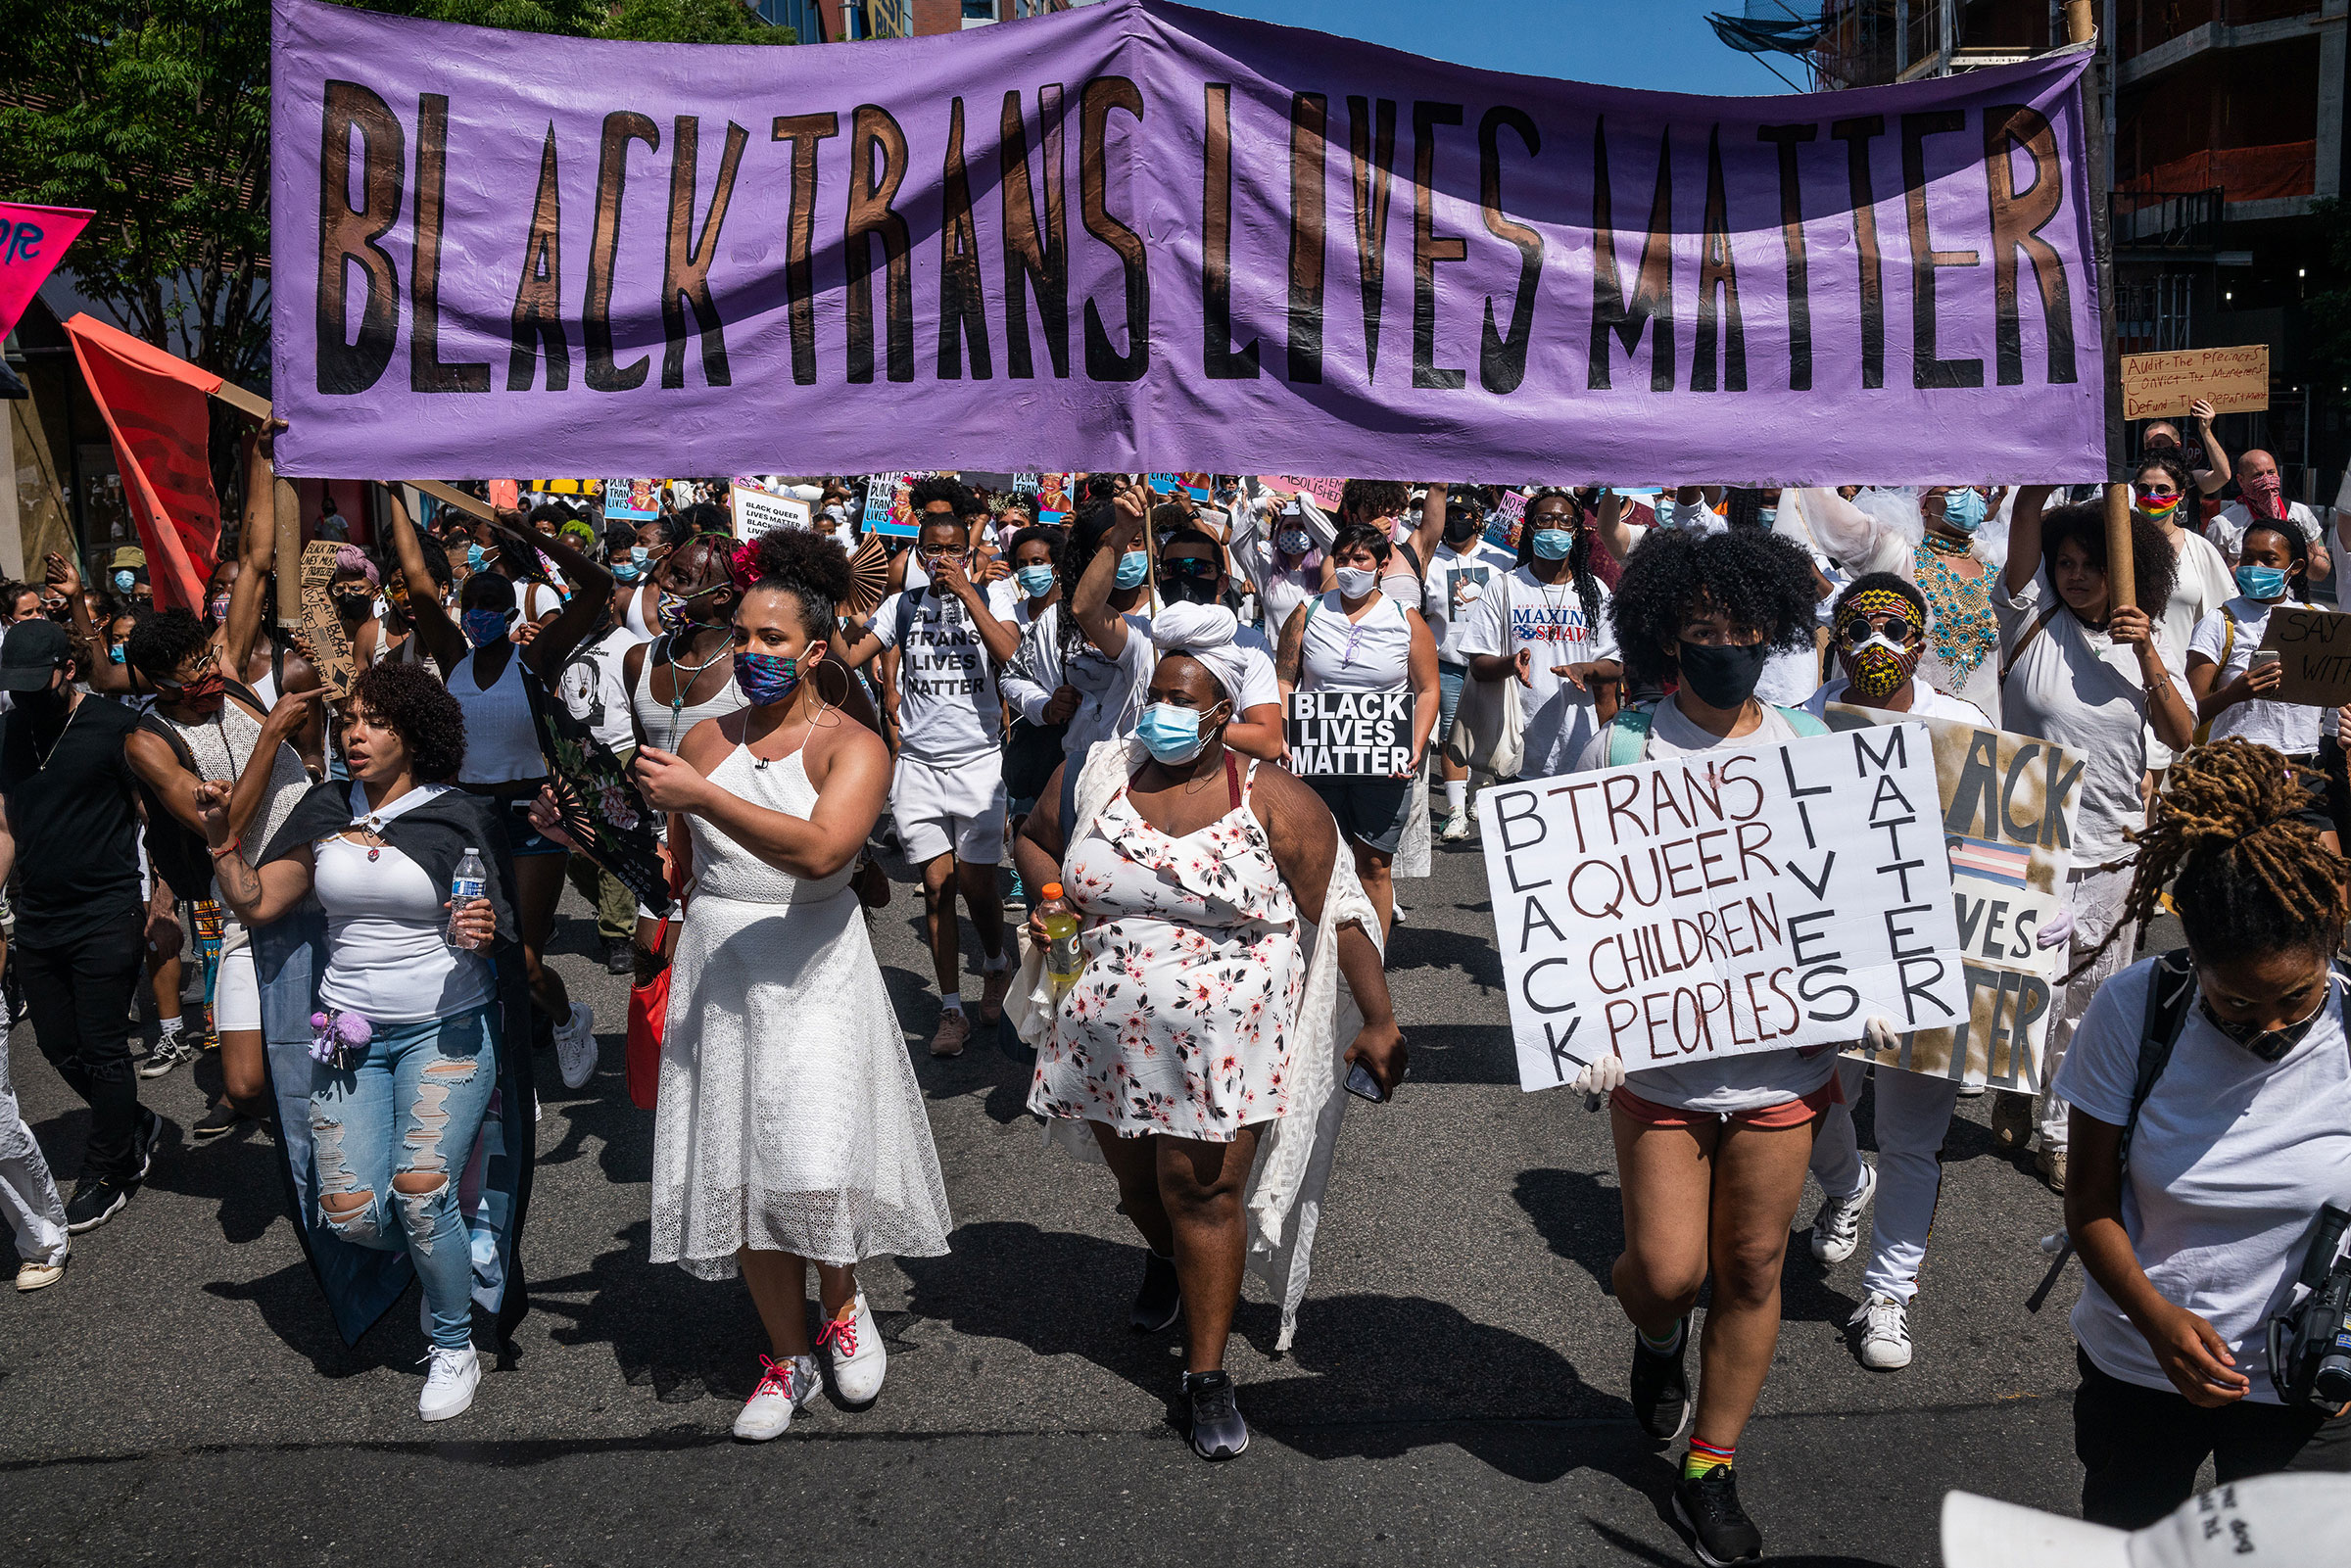 Demonstrators carry a banner reading "Black Trans Lives Matter" during a march in New York, on June 14, 2020.